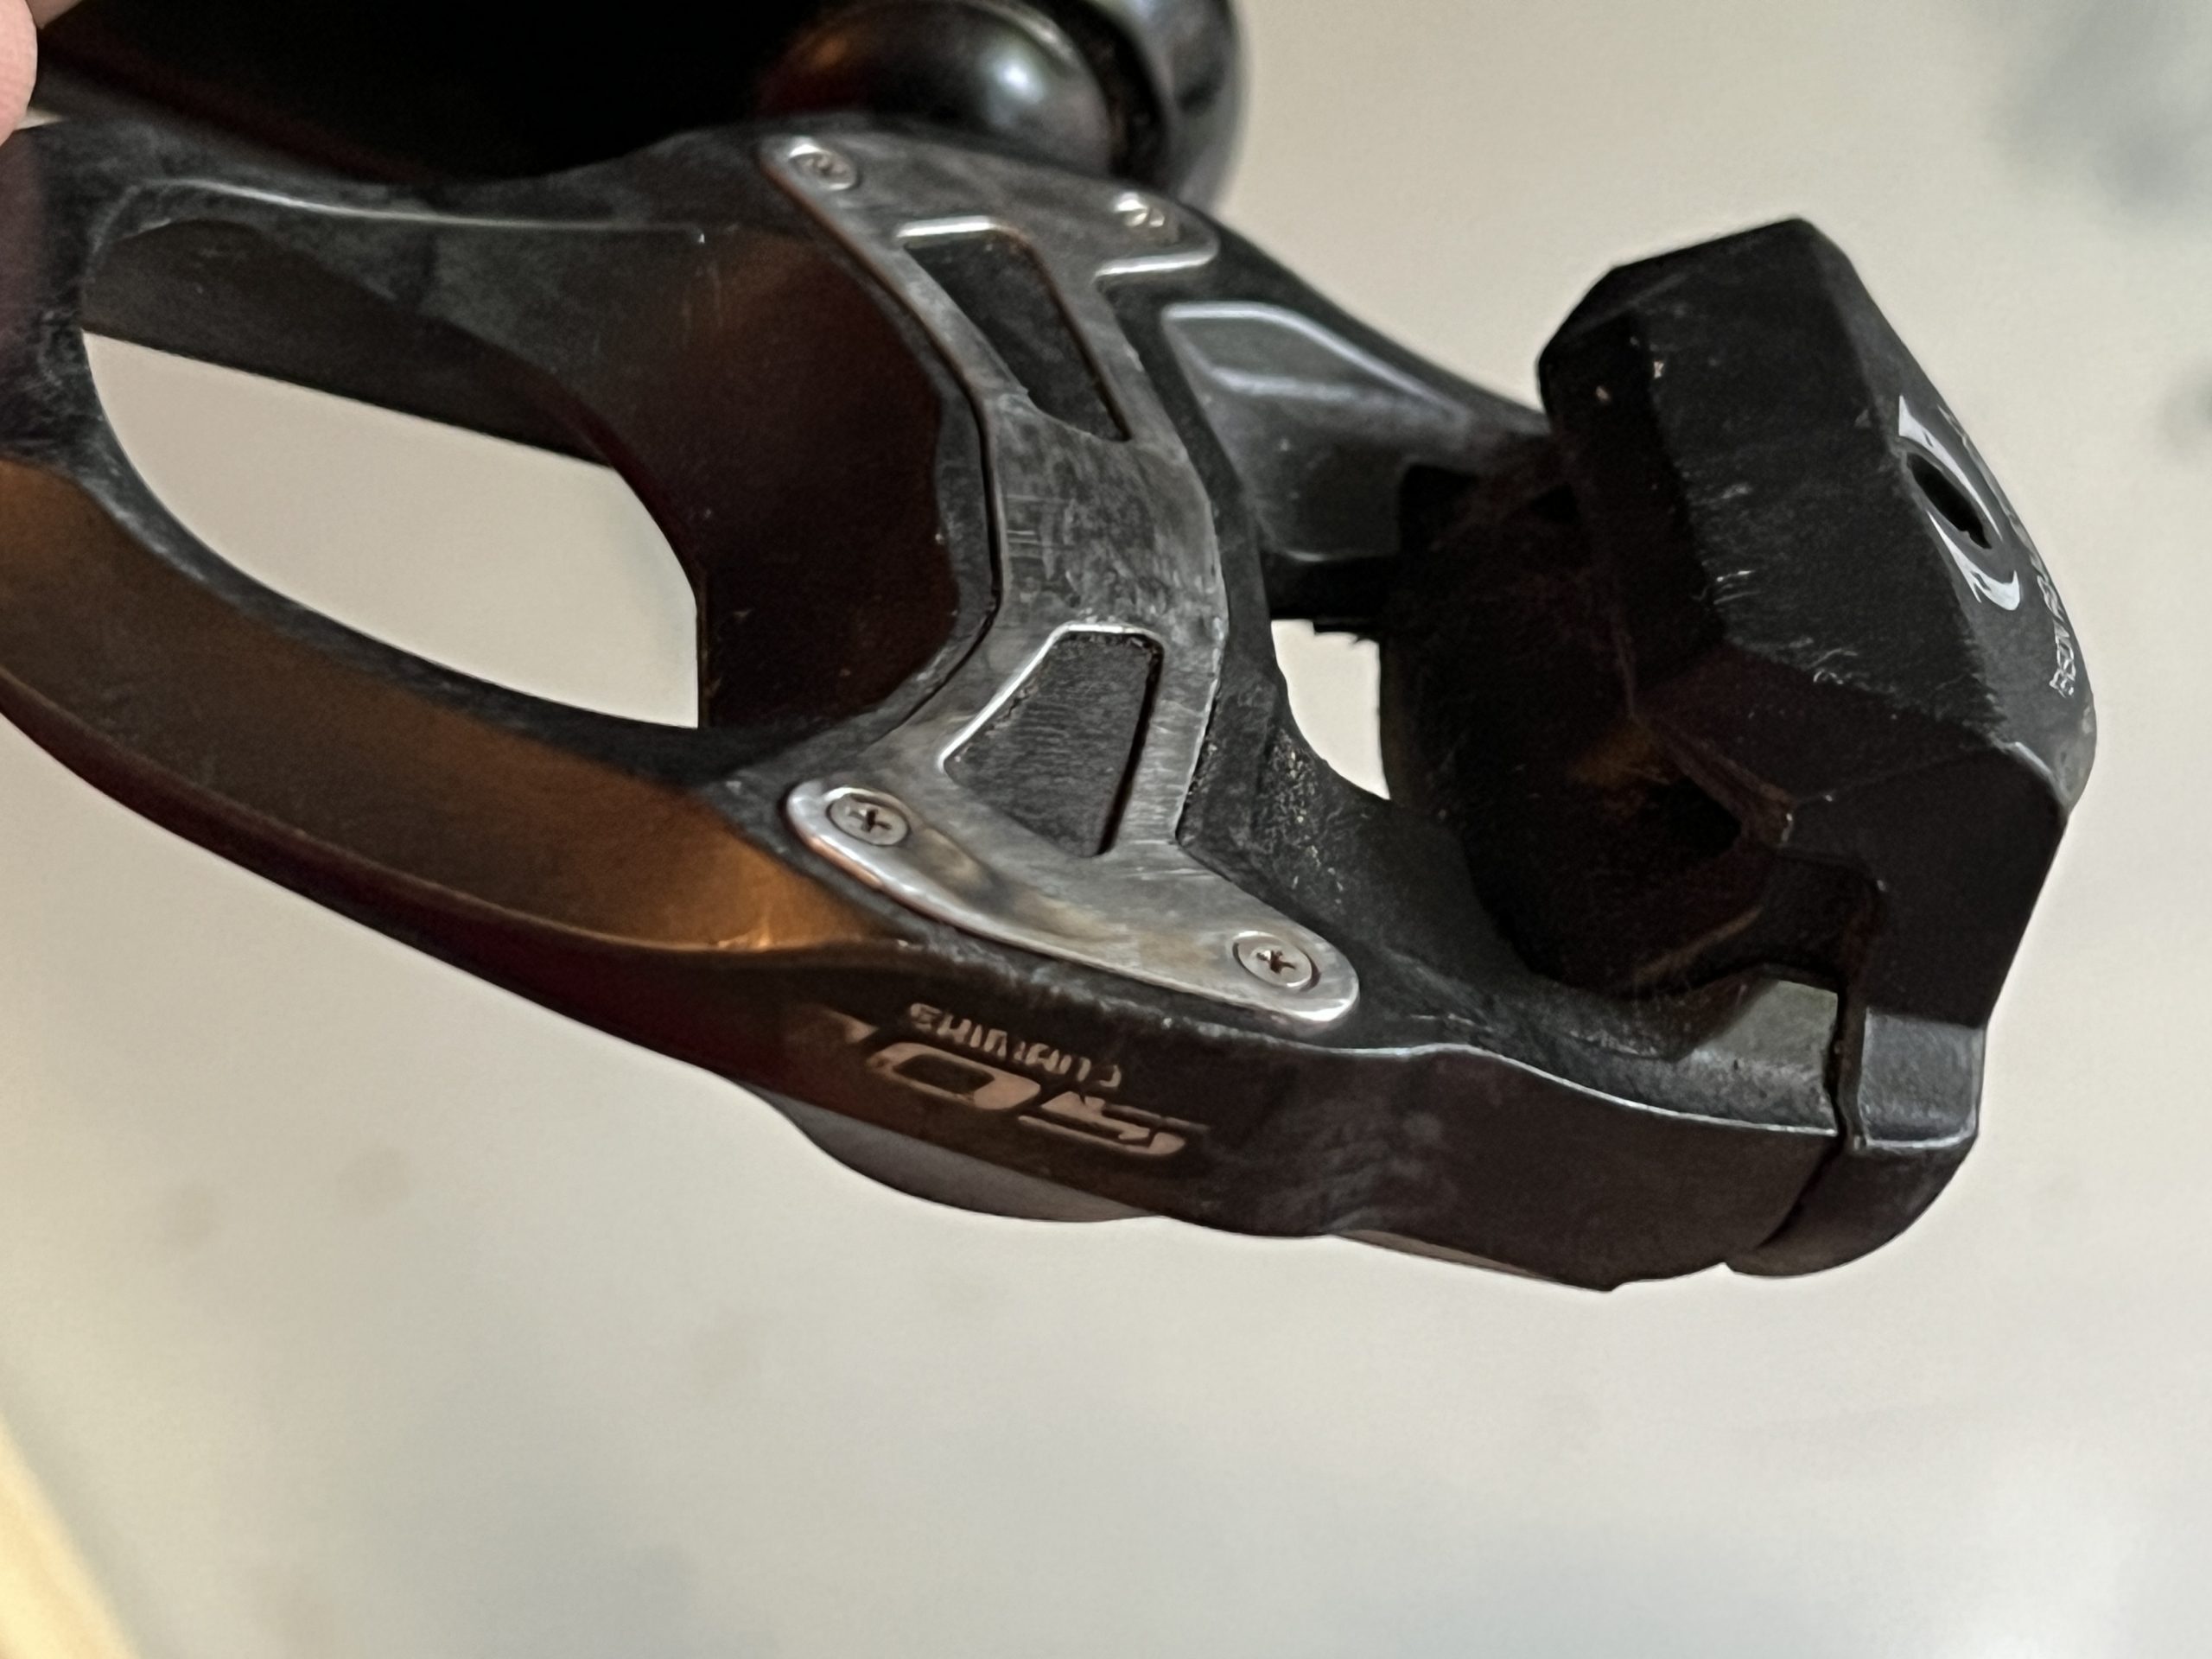 Shimano 105 clipless pedals